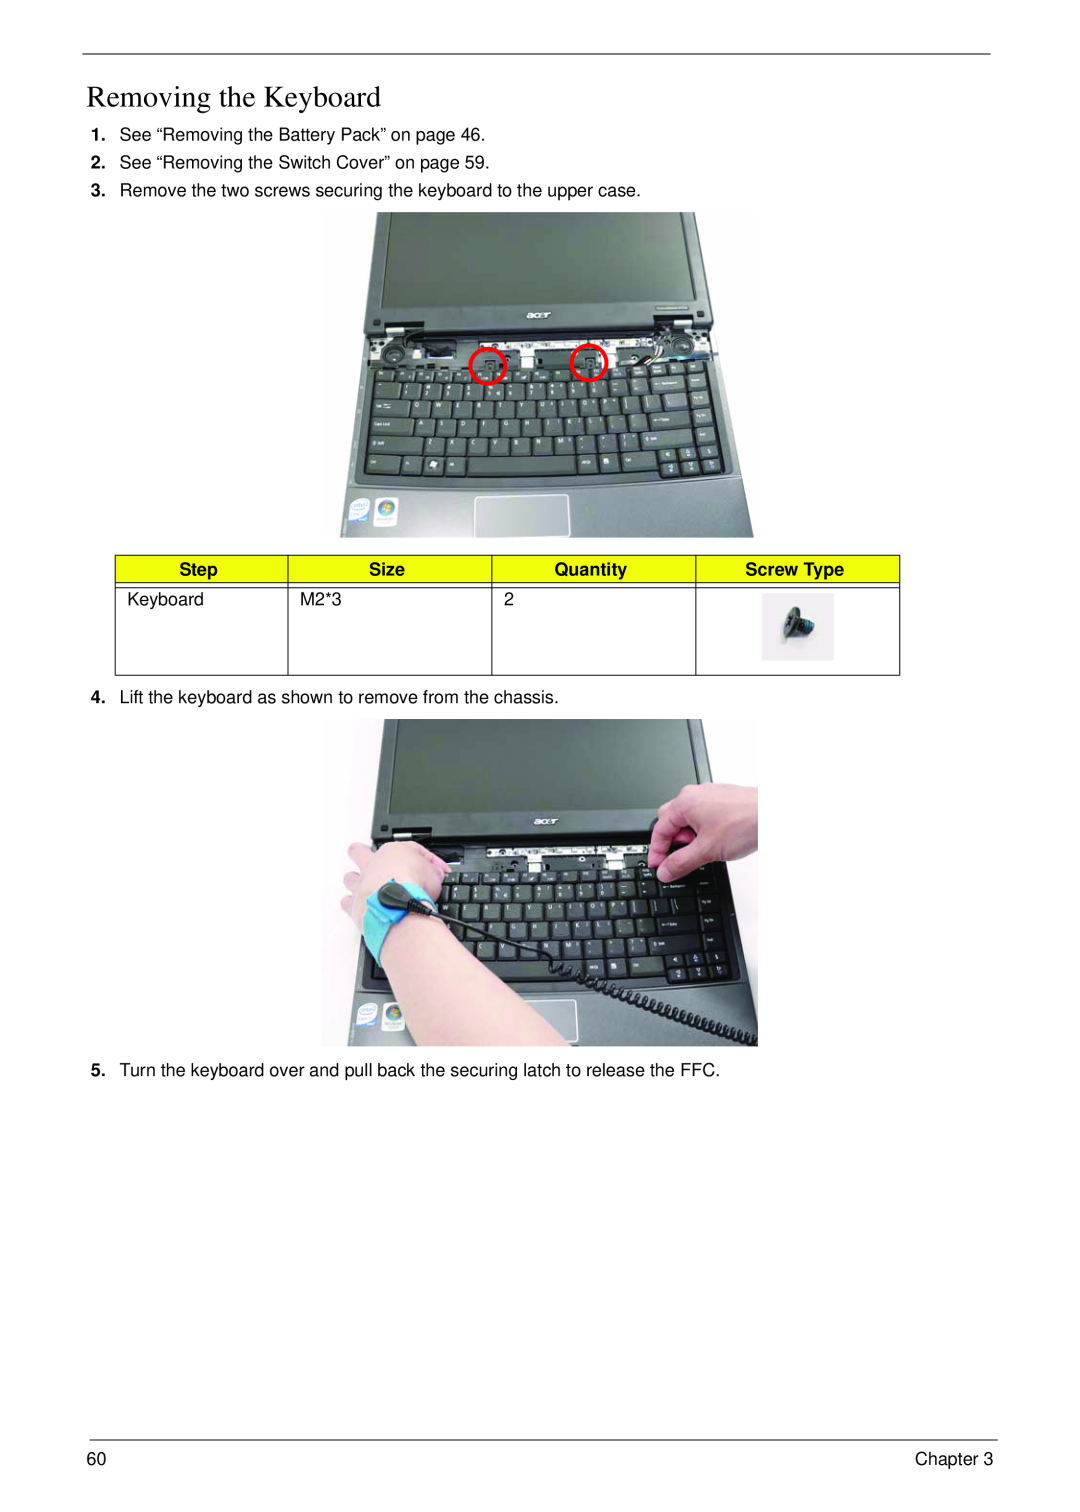 Acer 4730 manual Removing the Keyboard, Step, Size, Quantity, Screw Type, M2*3 